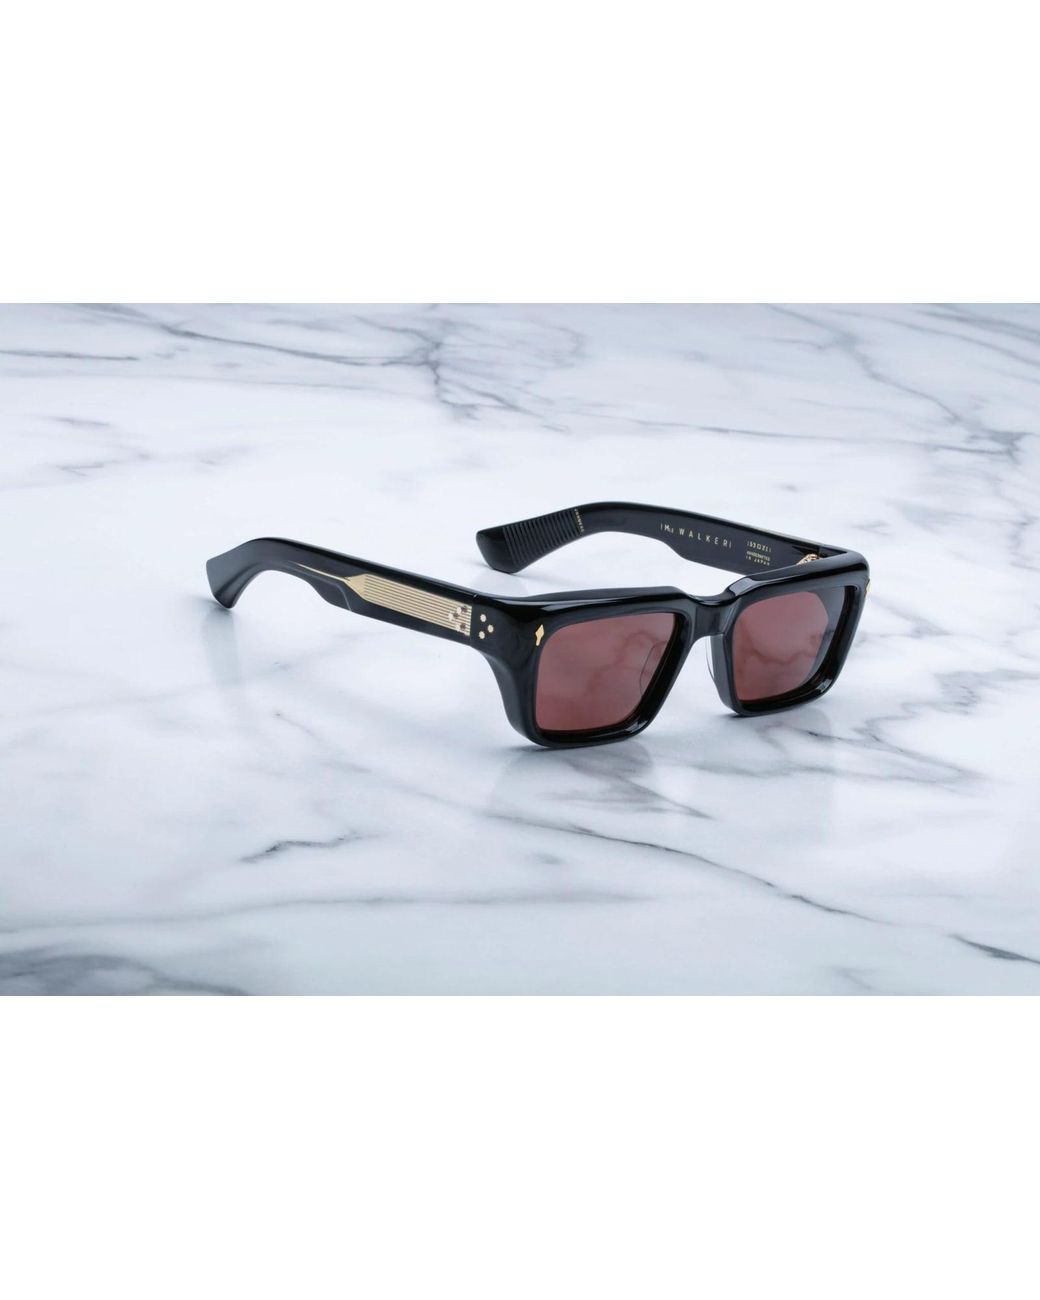 Jacques Marie Mage Walker - Eclipse Sunglasses Sunglasses in Black | Lyst